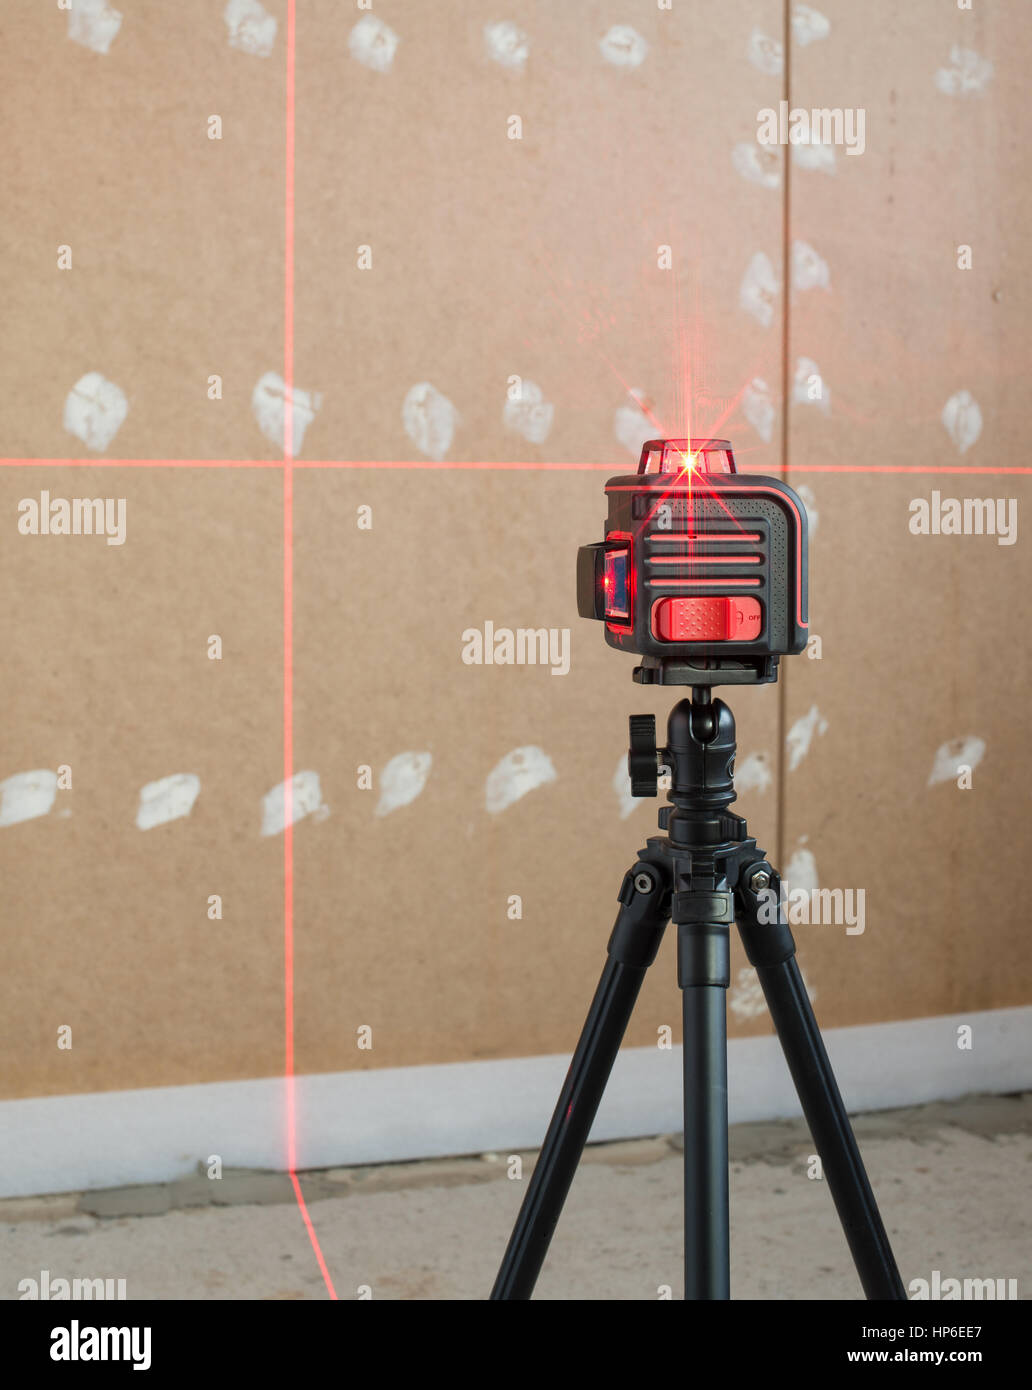 Laser level measuring tool in construction site Stock Photo - Alamy